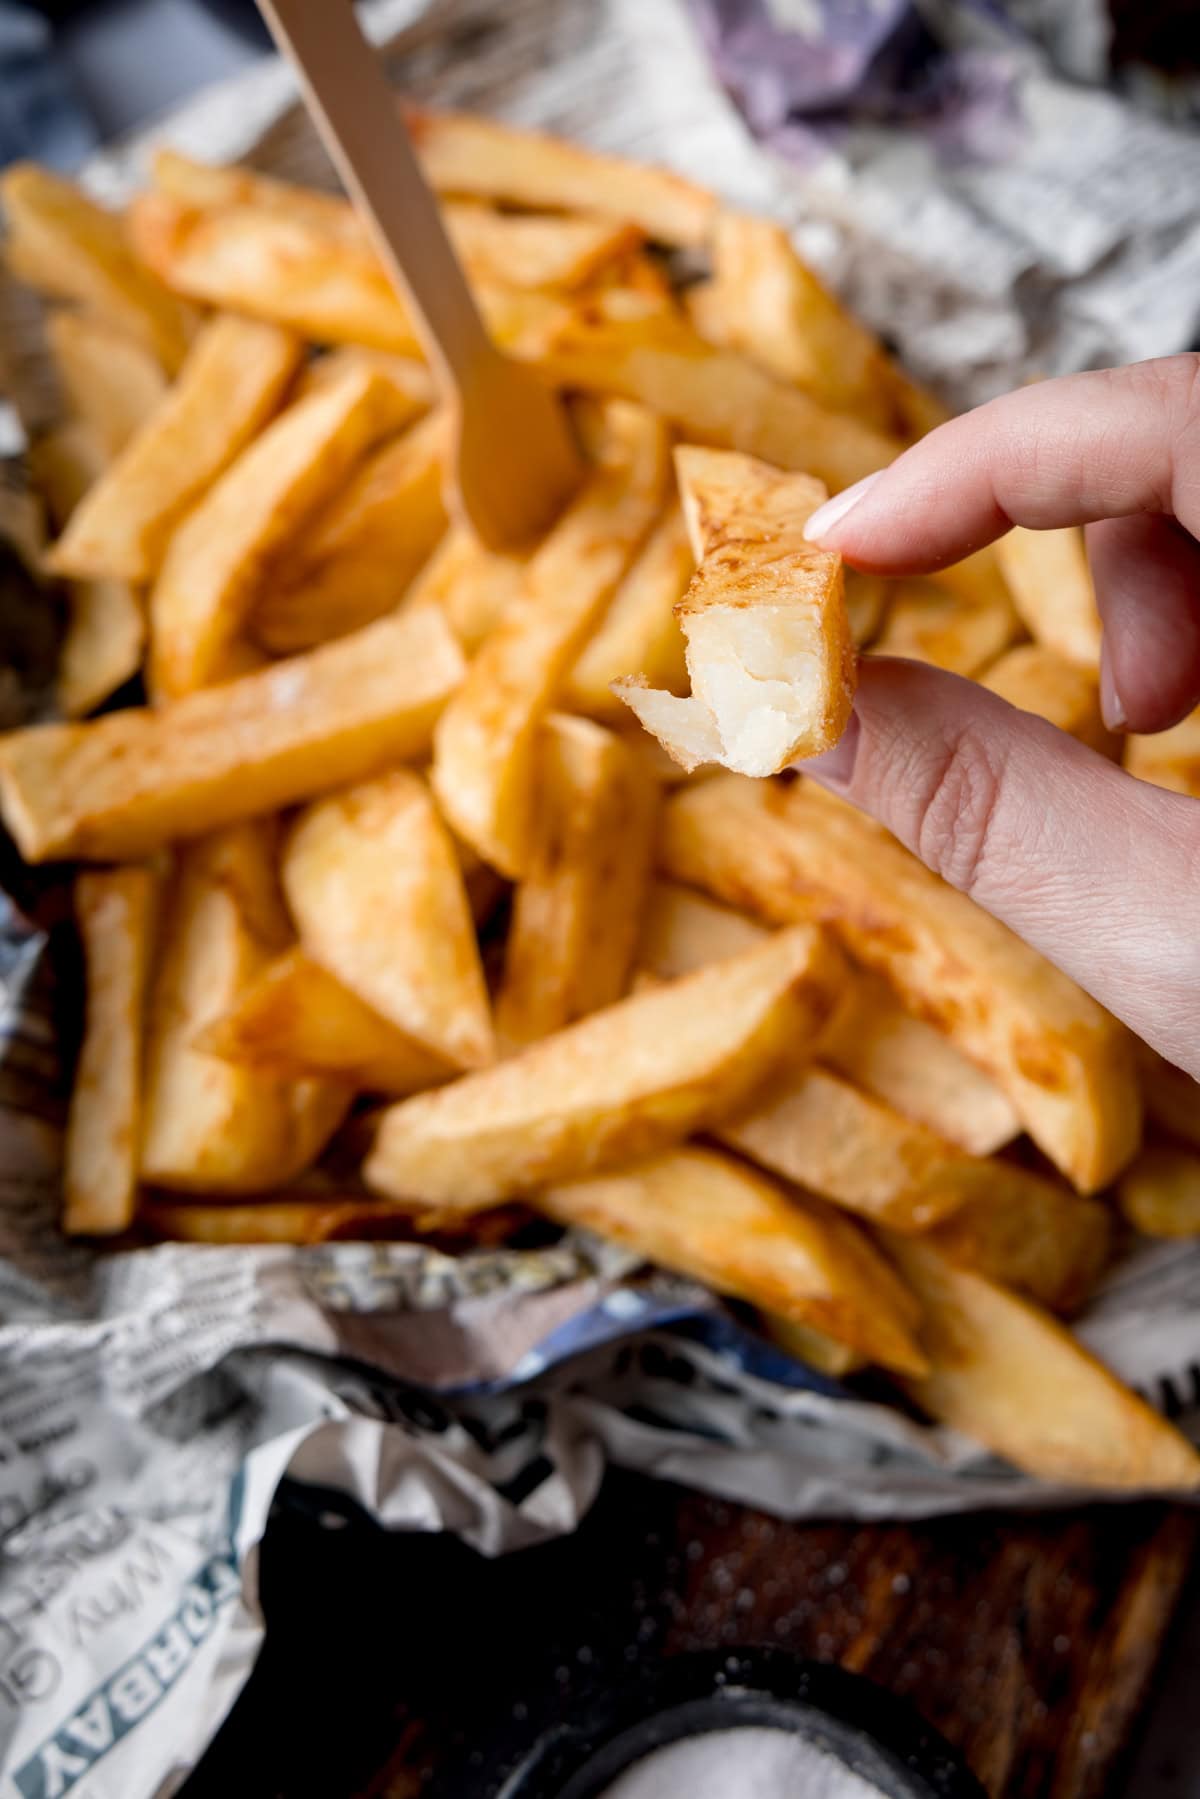 A tall, overhead image of Chip Shop-Style Chips on top of some crumpled newspaper, with a small wooden fork sticking out of the chips. There is also a thumb and forefinger holding half a chip, so the white, fluffy inside can be seen. The chips and newspaper are placed on a wooden surface. In the bottom middle of the background there is a small black dish of salt.